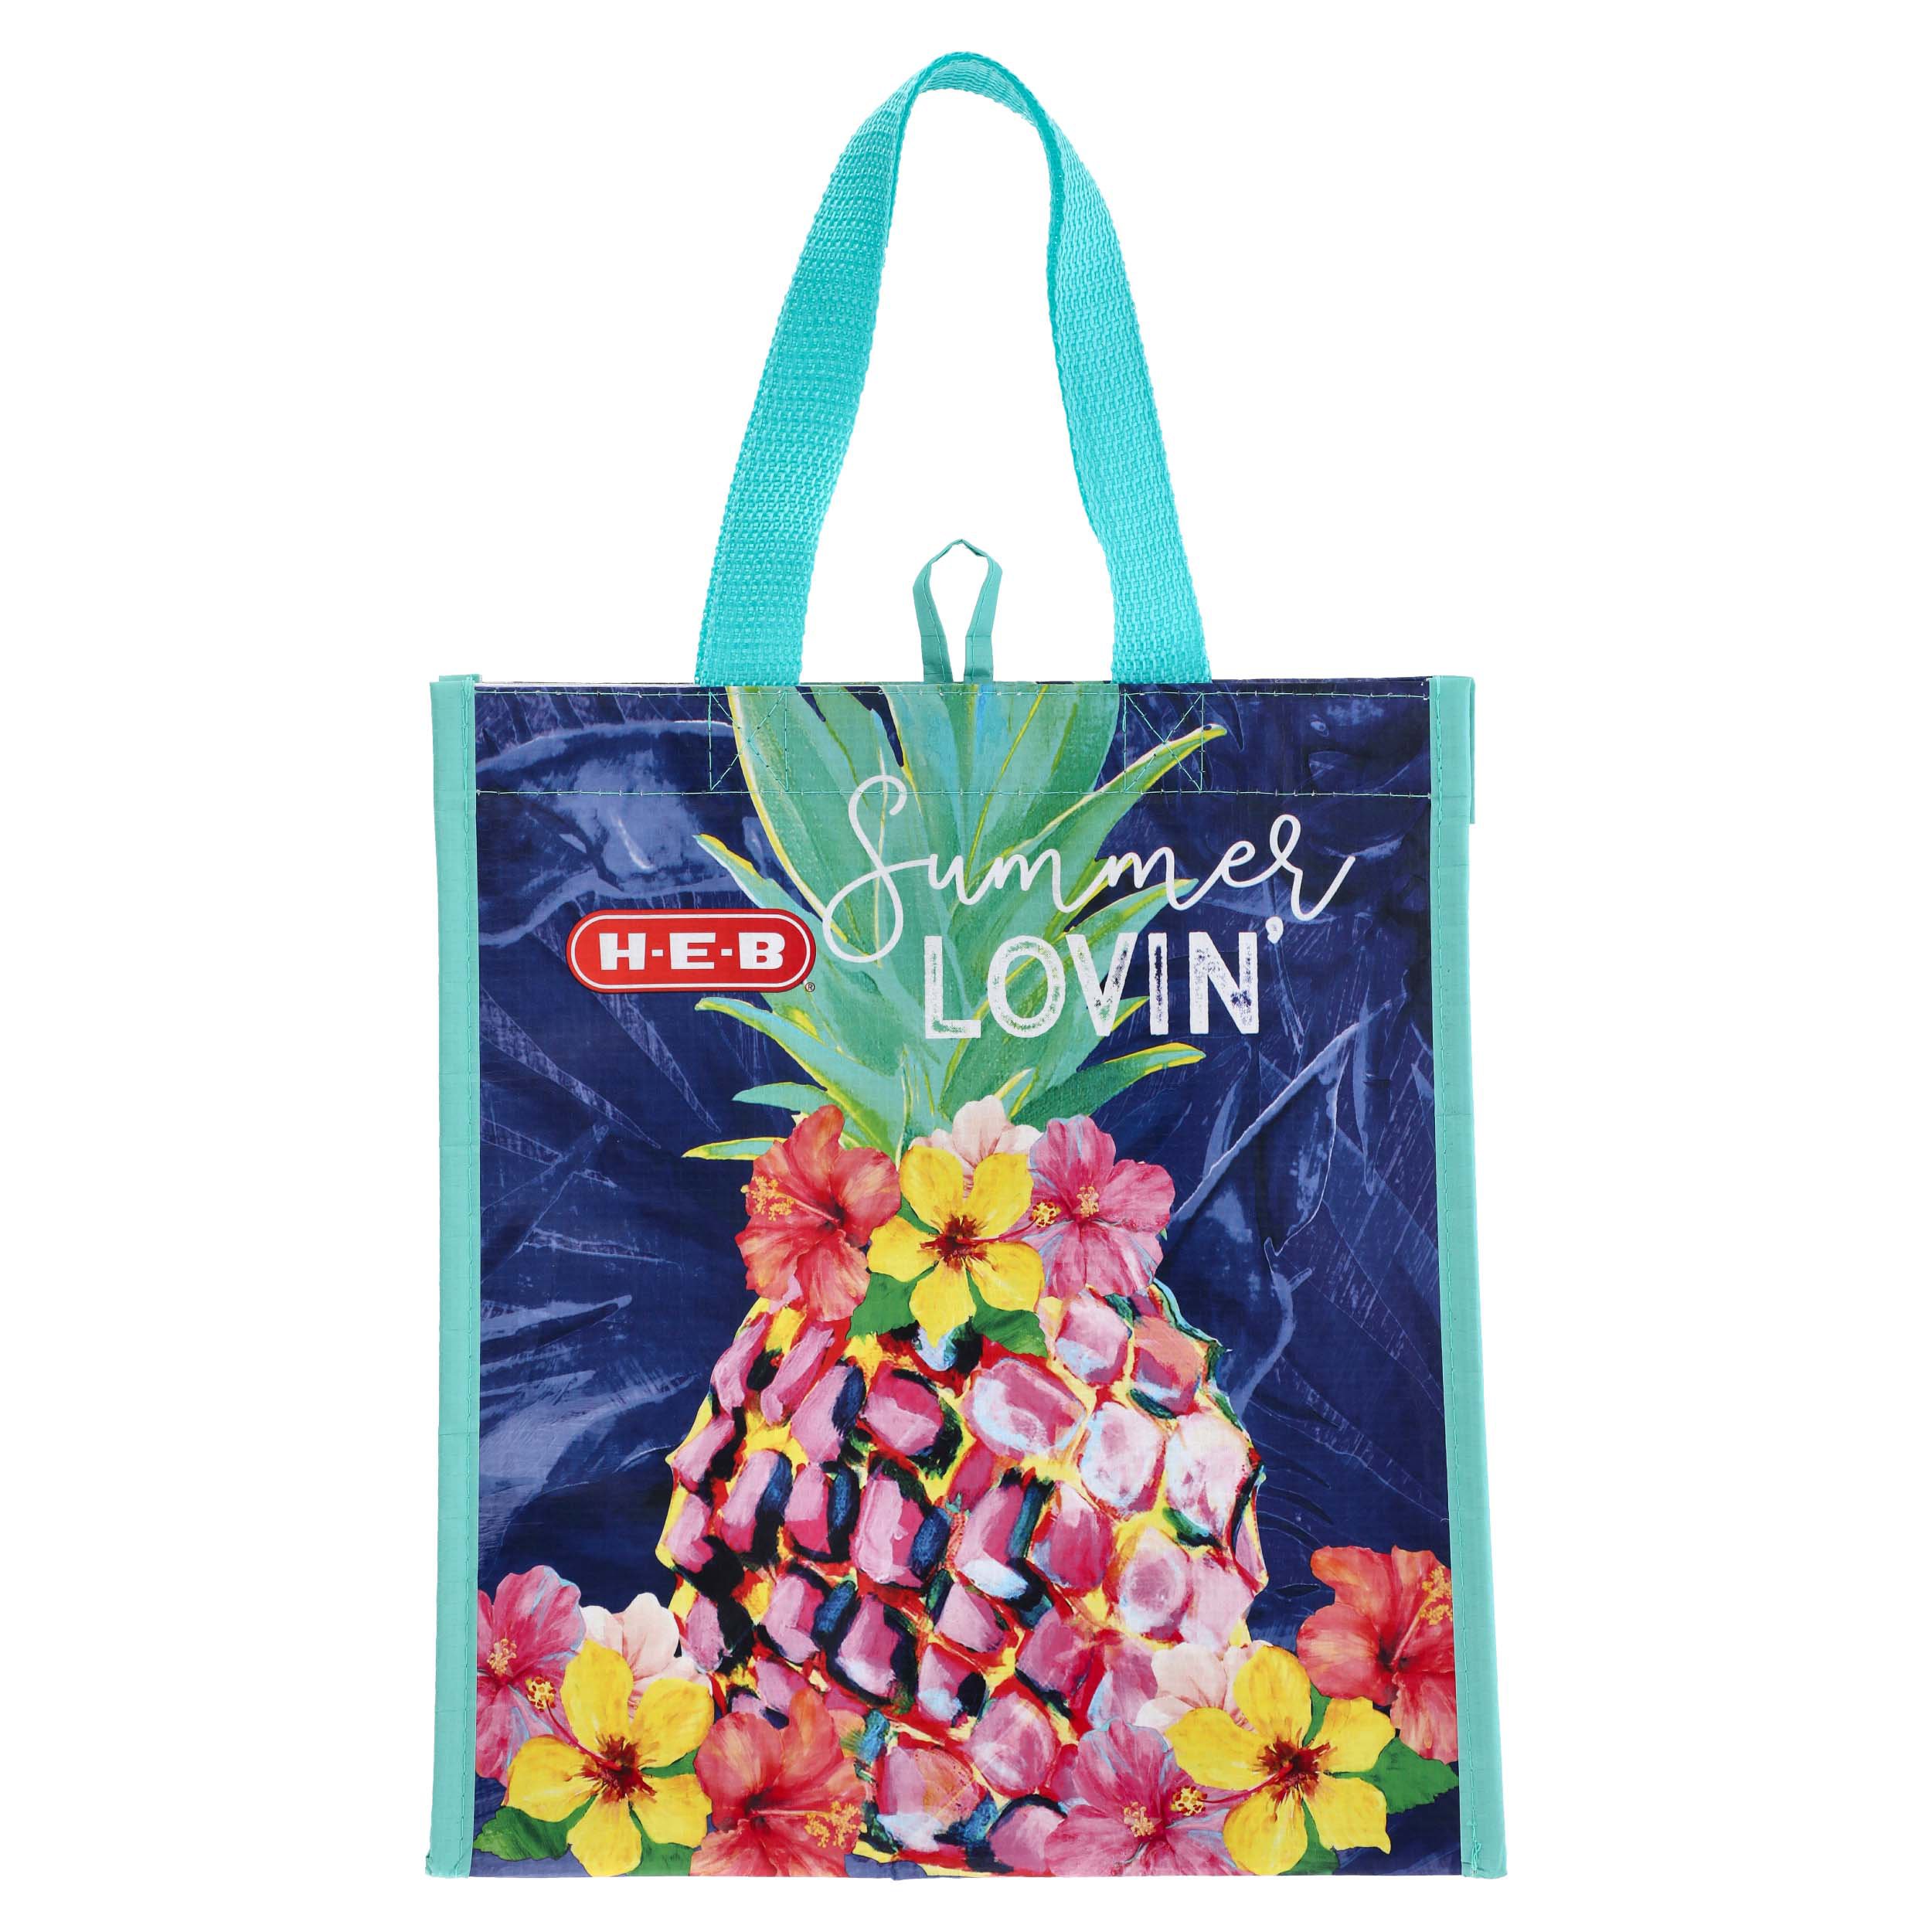 Details about   Hawaiian insulated Non-Woven Lunch Shopping Eco Tote Bag Hot Cold PINEAPPLE NIB 